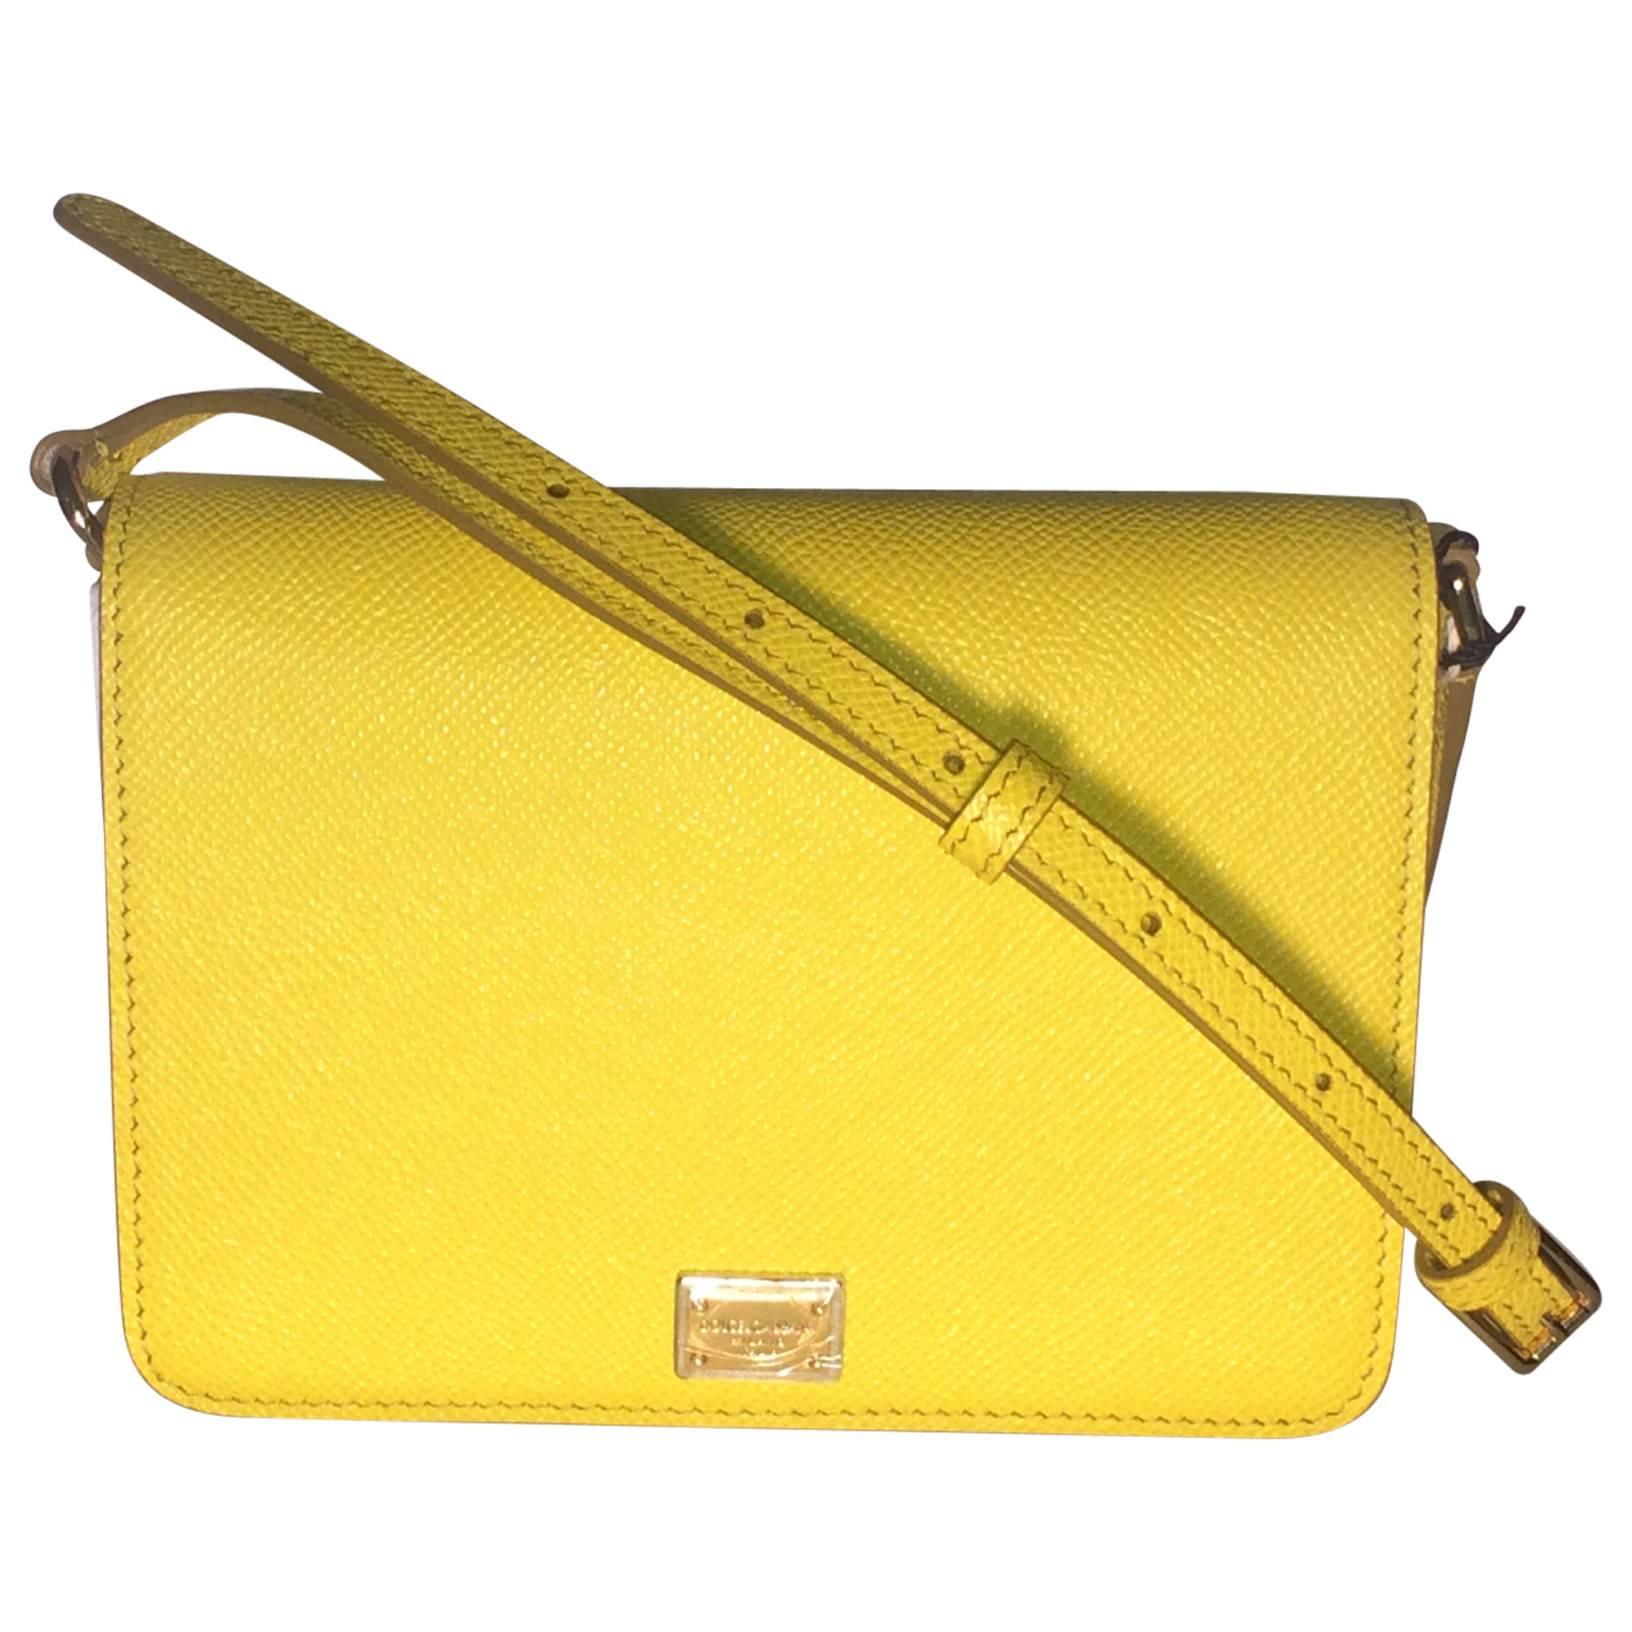 New with Tags Dolce & Gabbana Yellow Leather Cross Body Purse Bag 